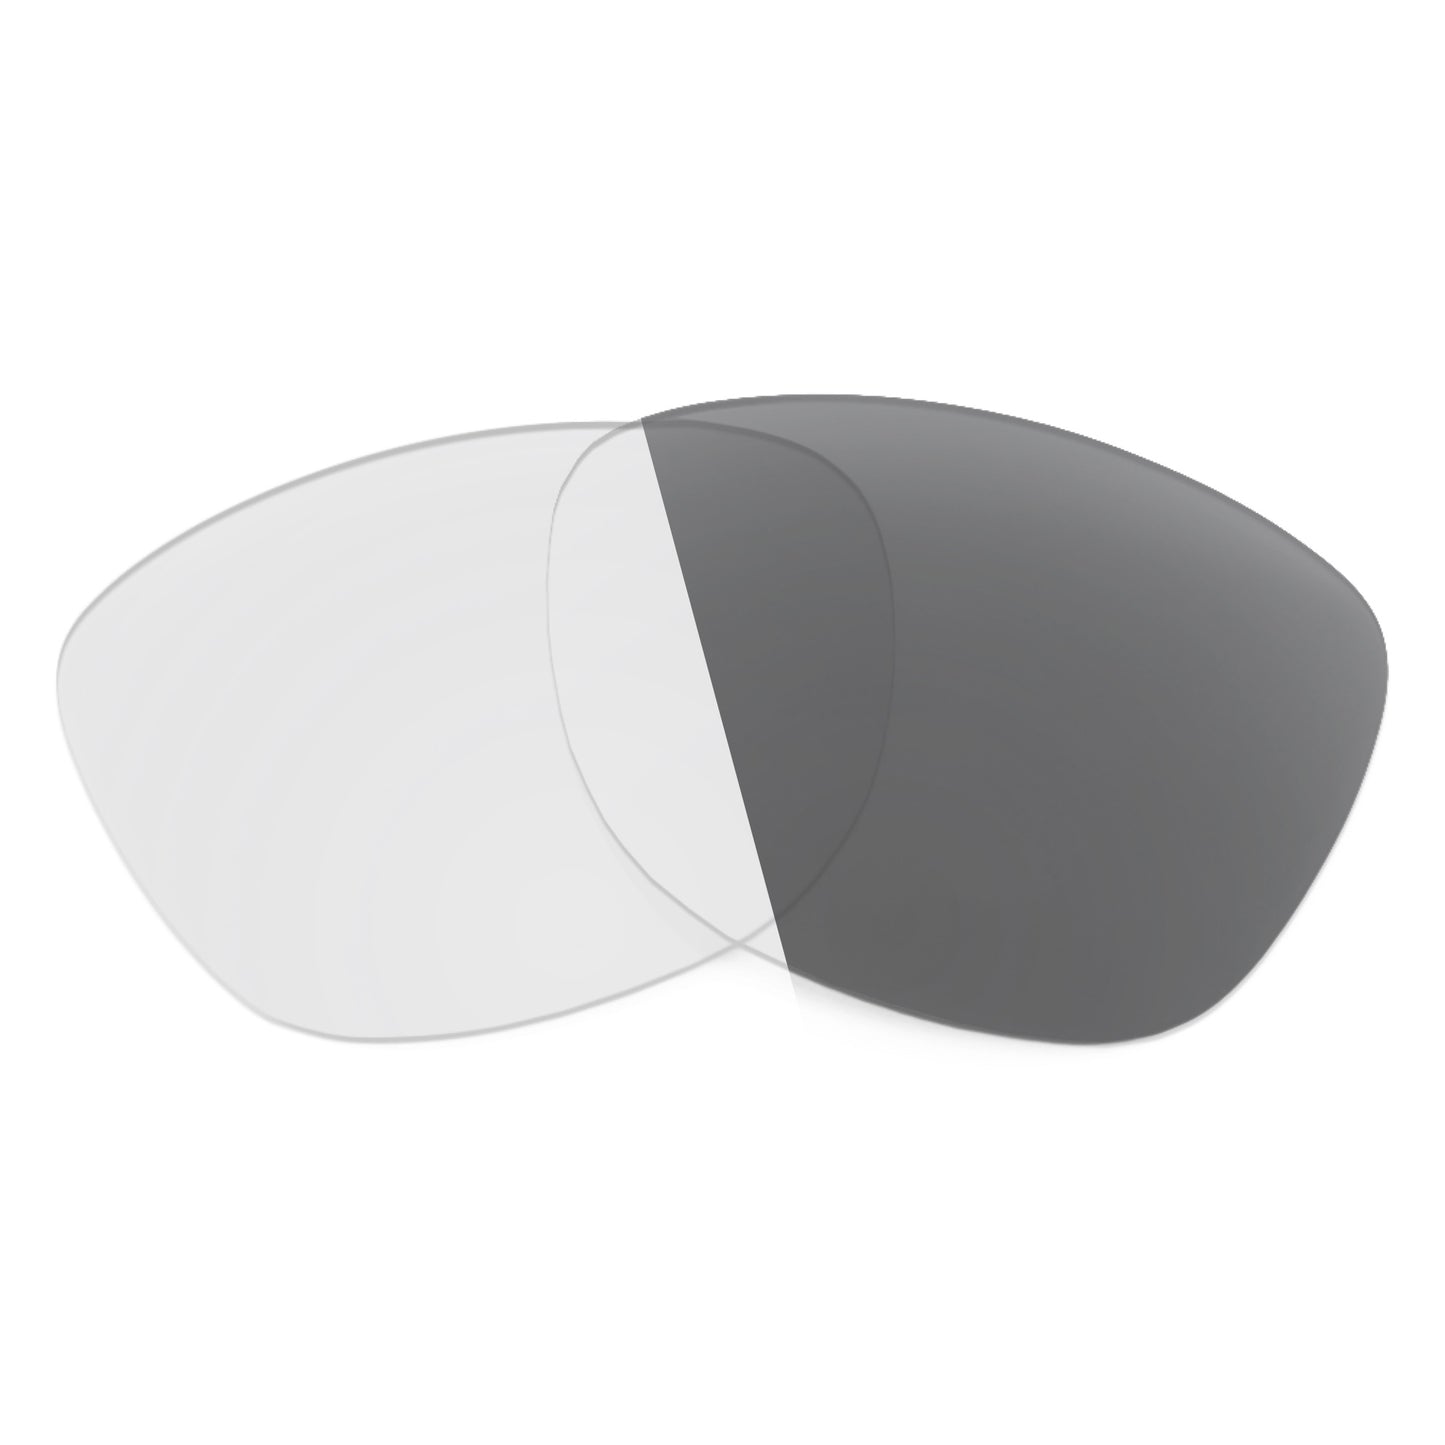 Revant replacement lenses for Ray-Ban RB3528 58mm Non-Polarized Adapt Gray Photochromic